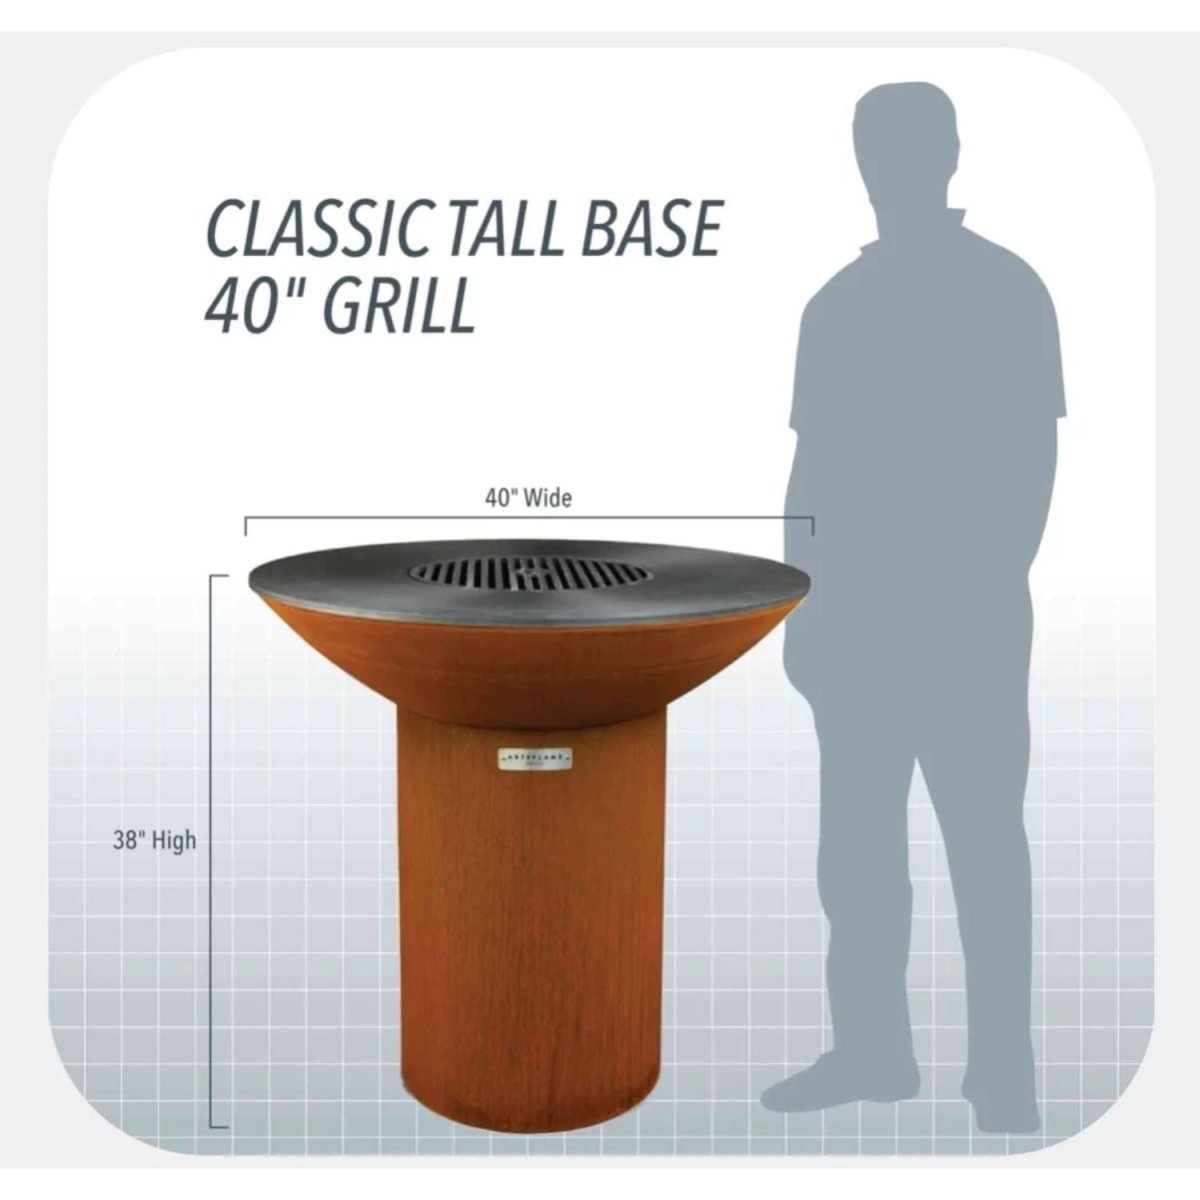 Arteflame Classic 40" Grill - Tall Round Base - Upper Livin